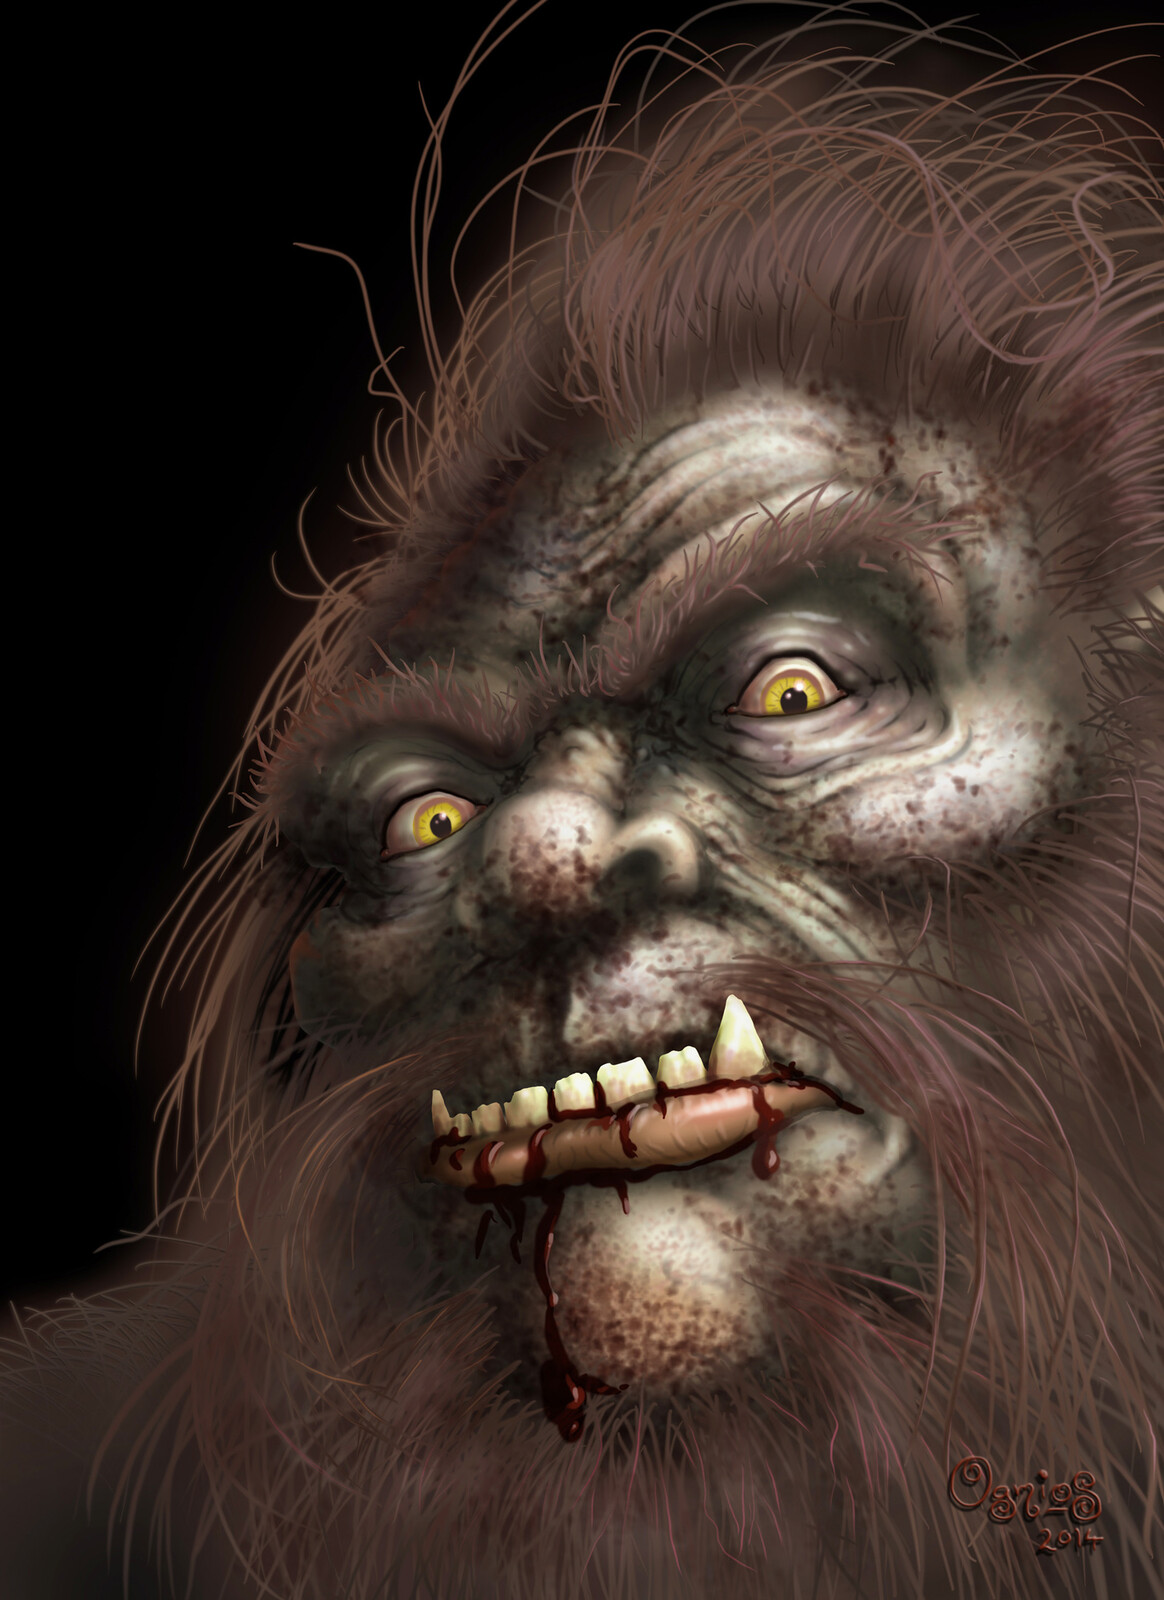 Bigfoot Wars, Redneck Apocalypse front  image. It could also quite possibly be my self-portrait when I wake up.